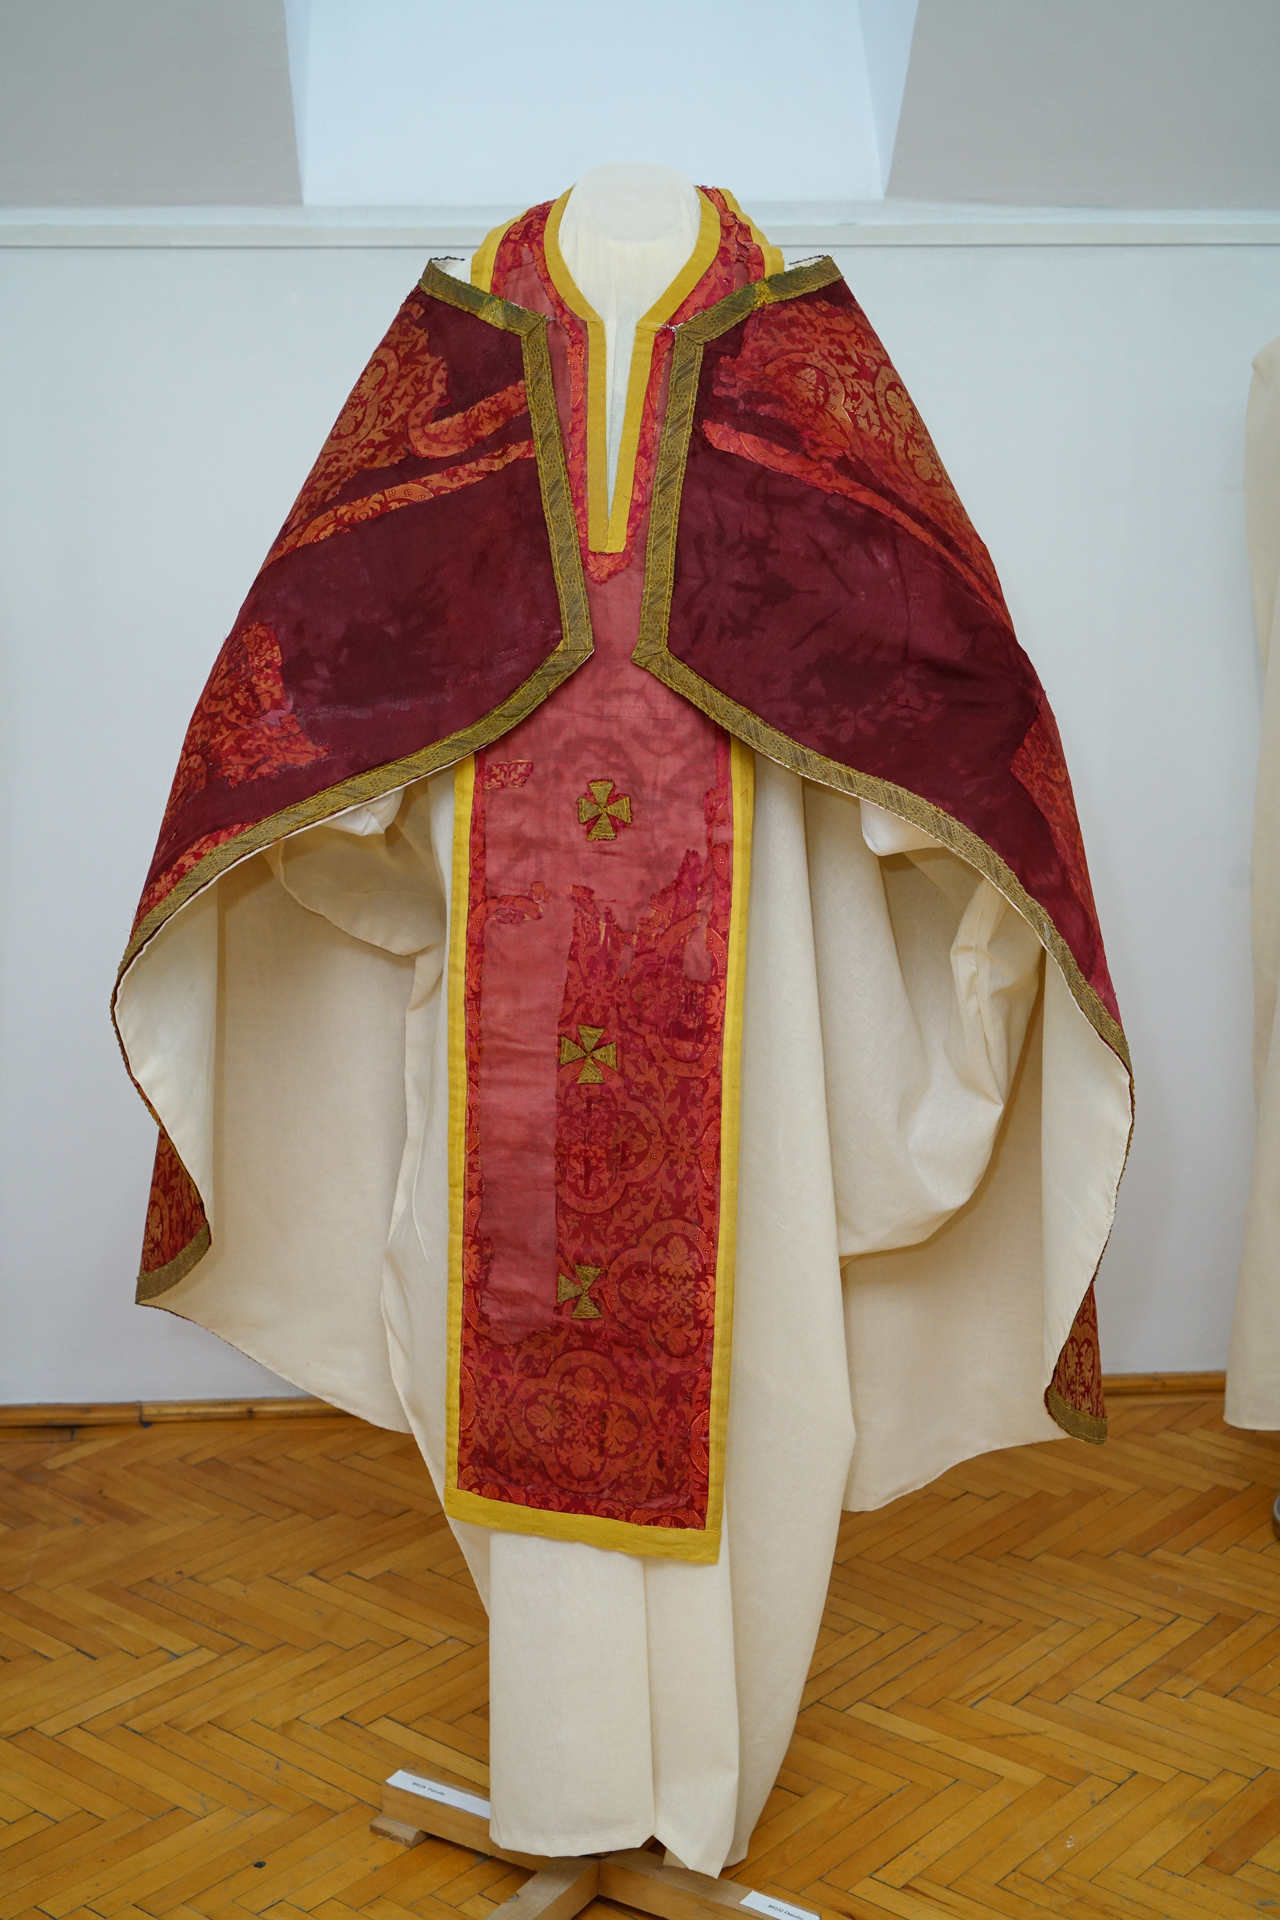 Artifacts restored within the project: liturgical garment (called in Romanian “felon”)